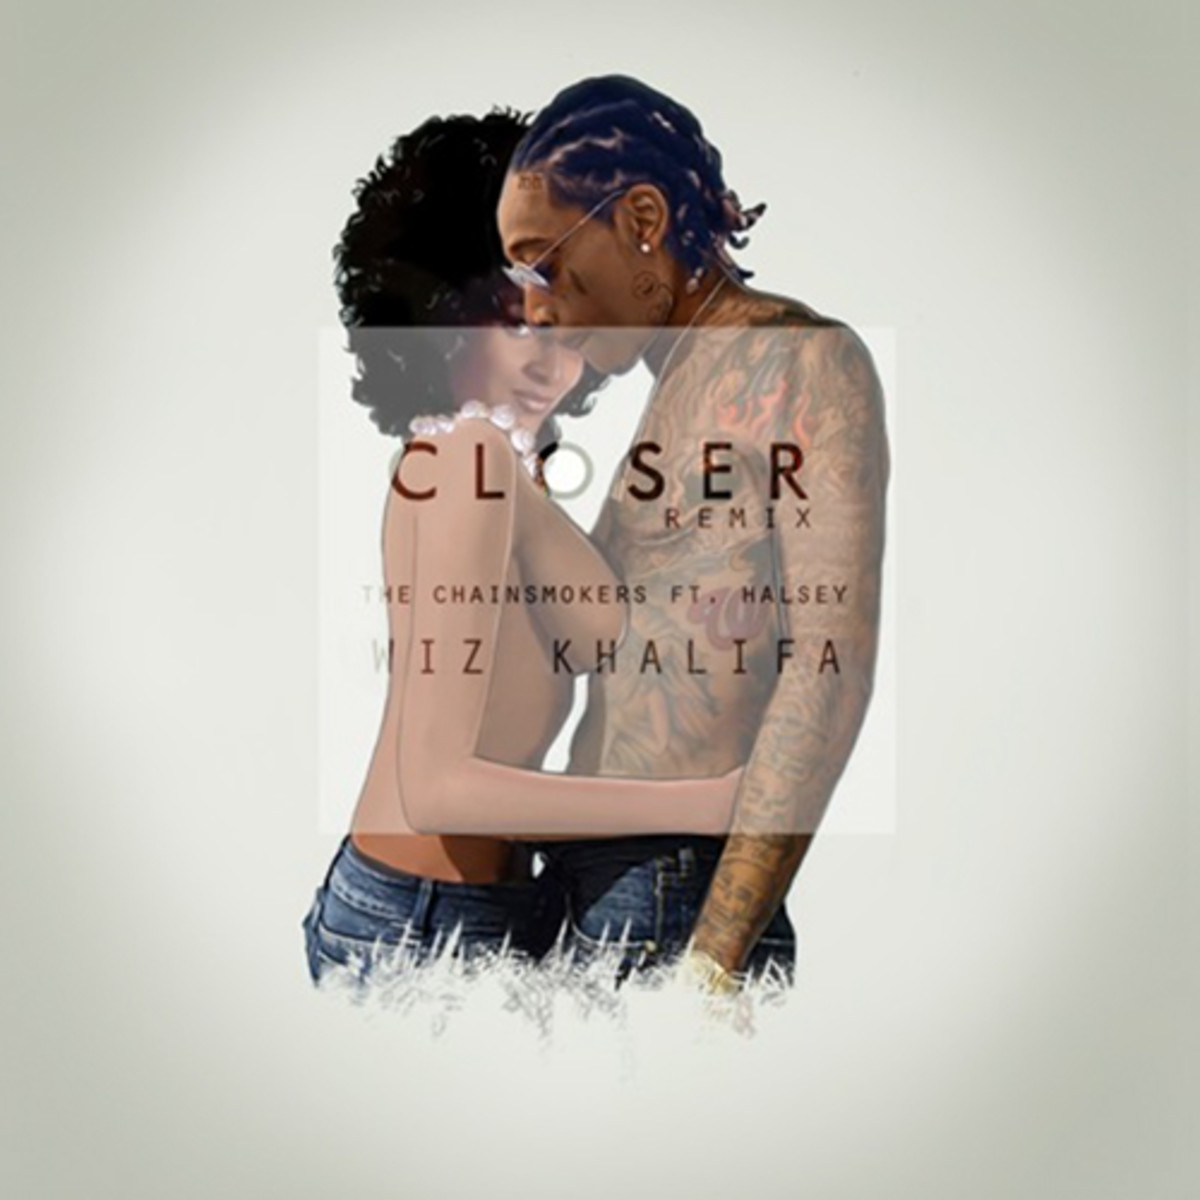 Wiz Khalifa Releases Remix of The Chainsmokers' Hit Song 'Closer.